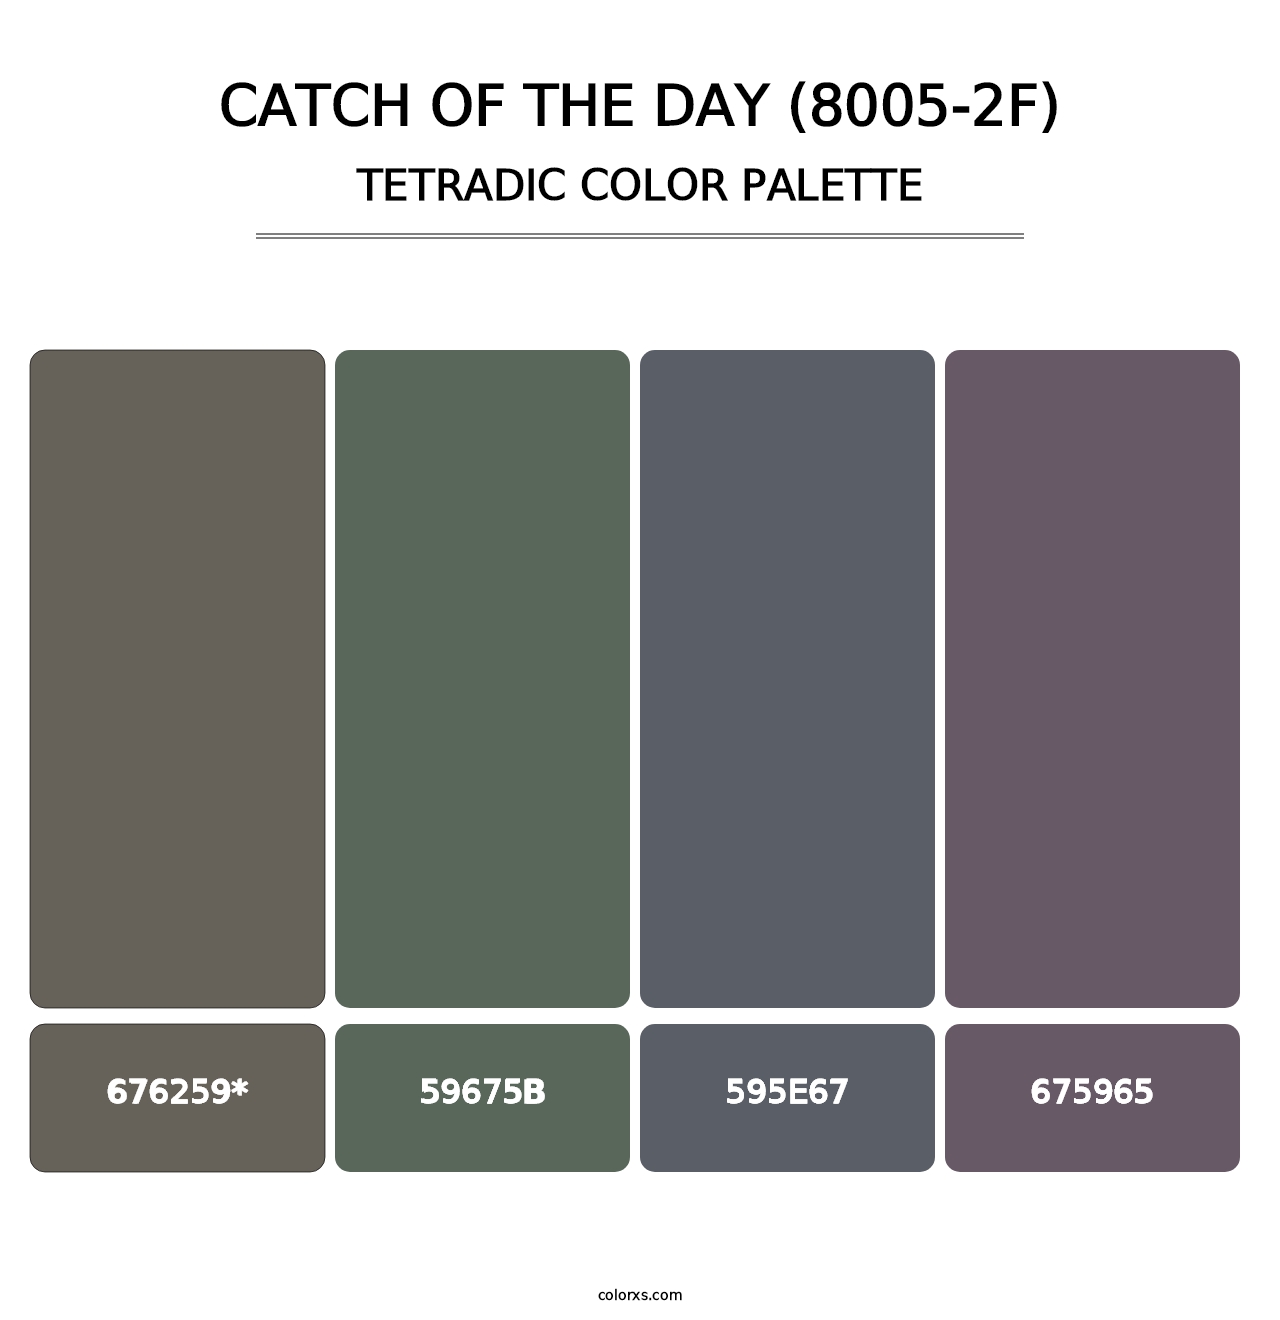 Catch of the Day (8005-2F) - Tetradic Color Palette